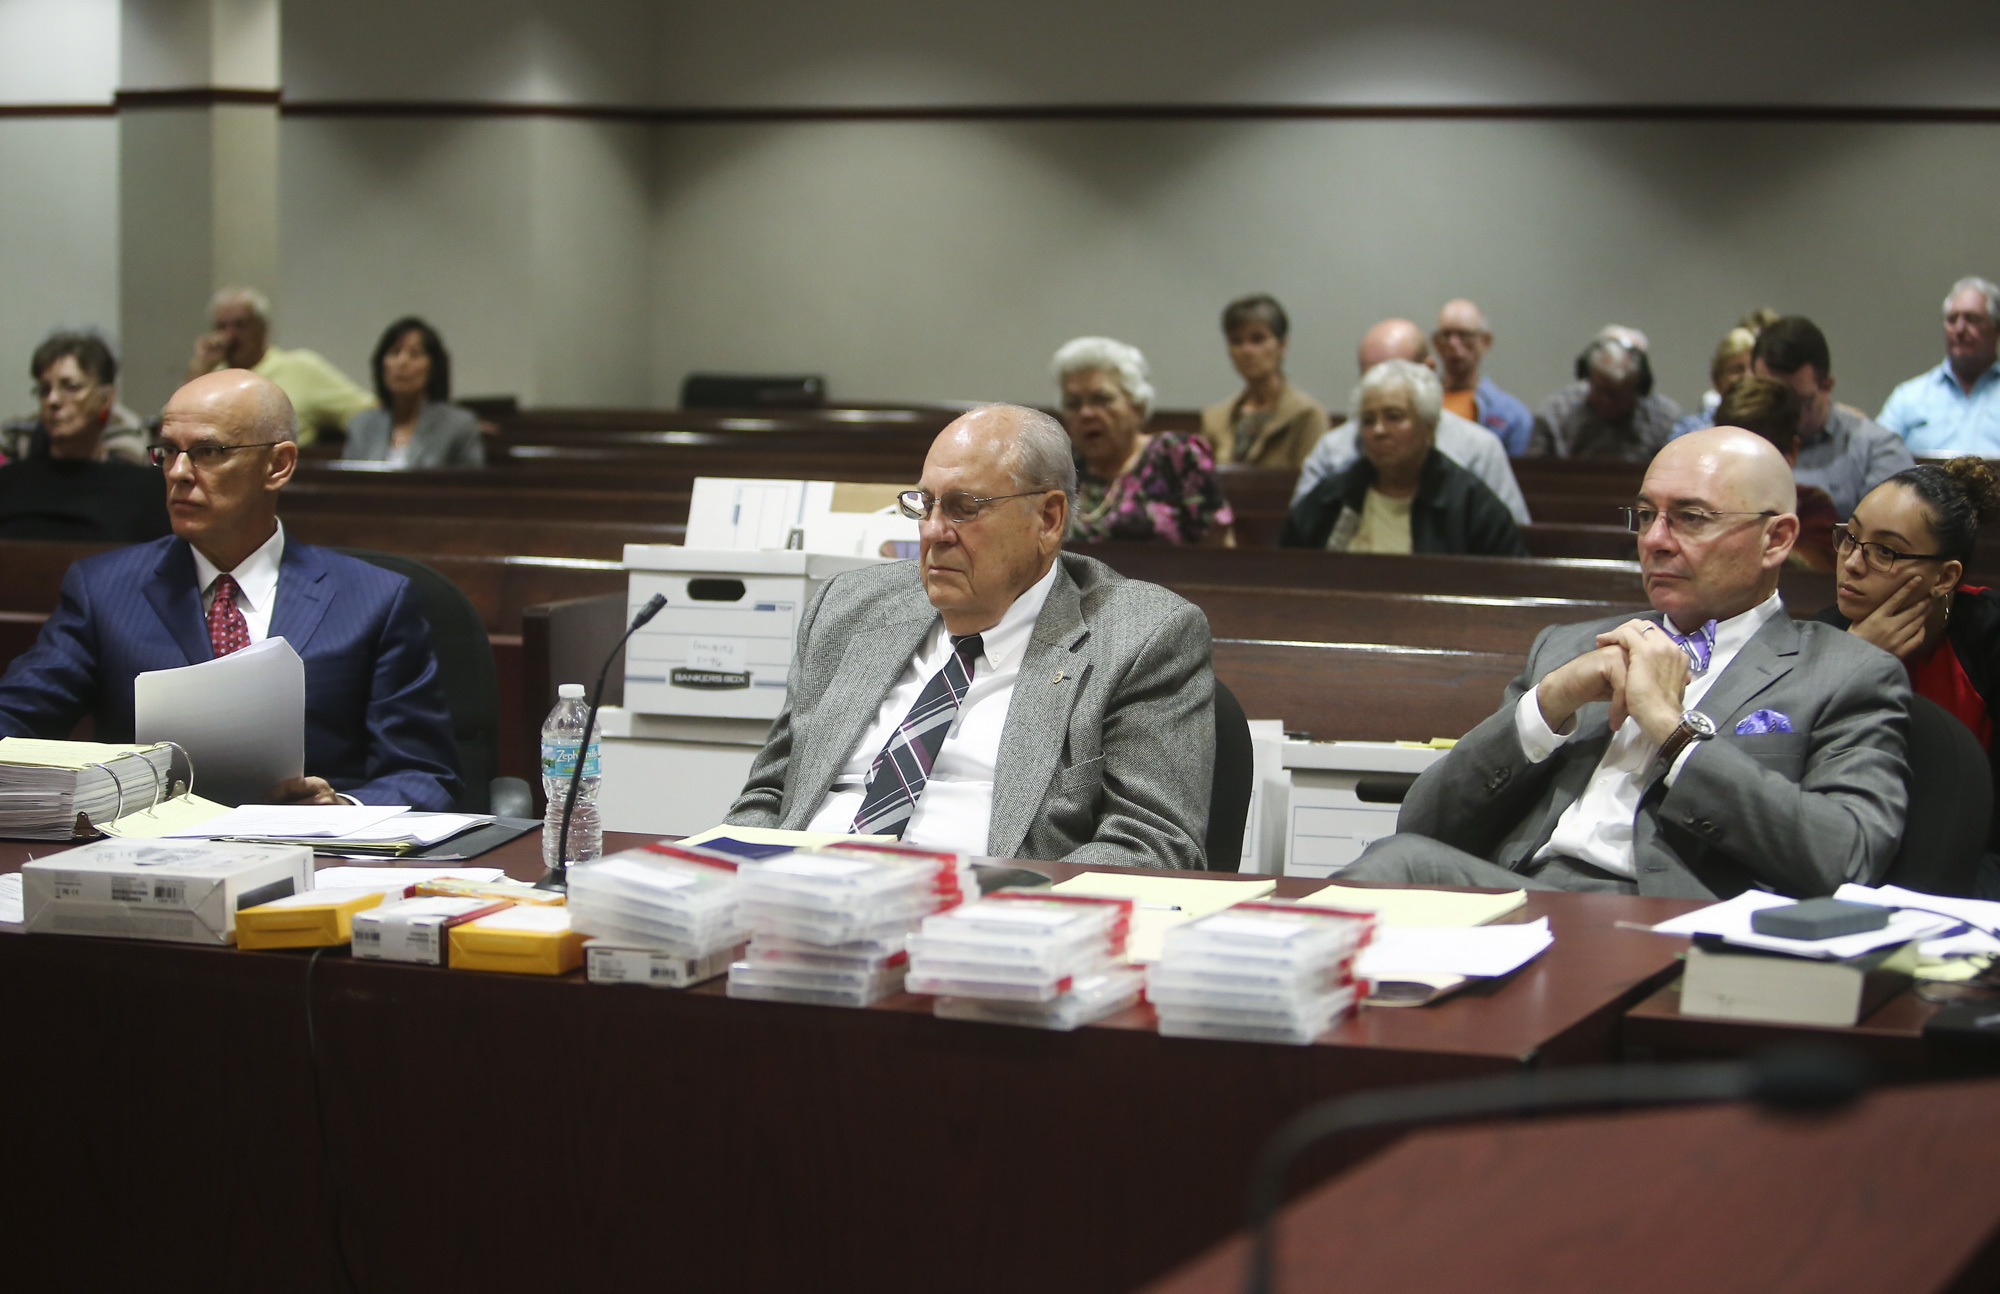 PHOTO: Retired police officer Curtis Reeves sits with his defense attorneys during a hearing at the Robert D. Sumner Judicial Center in Dade City, Fla. on Feb. 21, 2017.